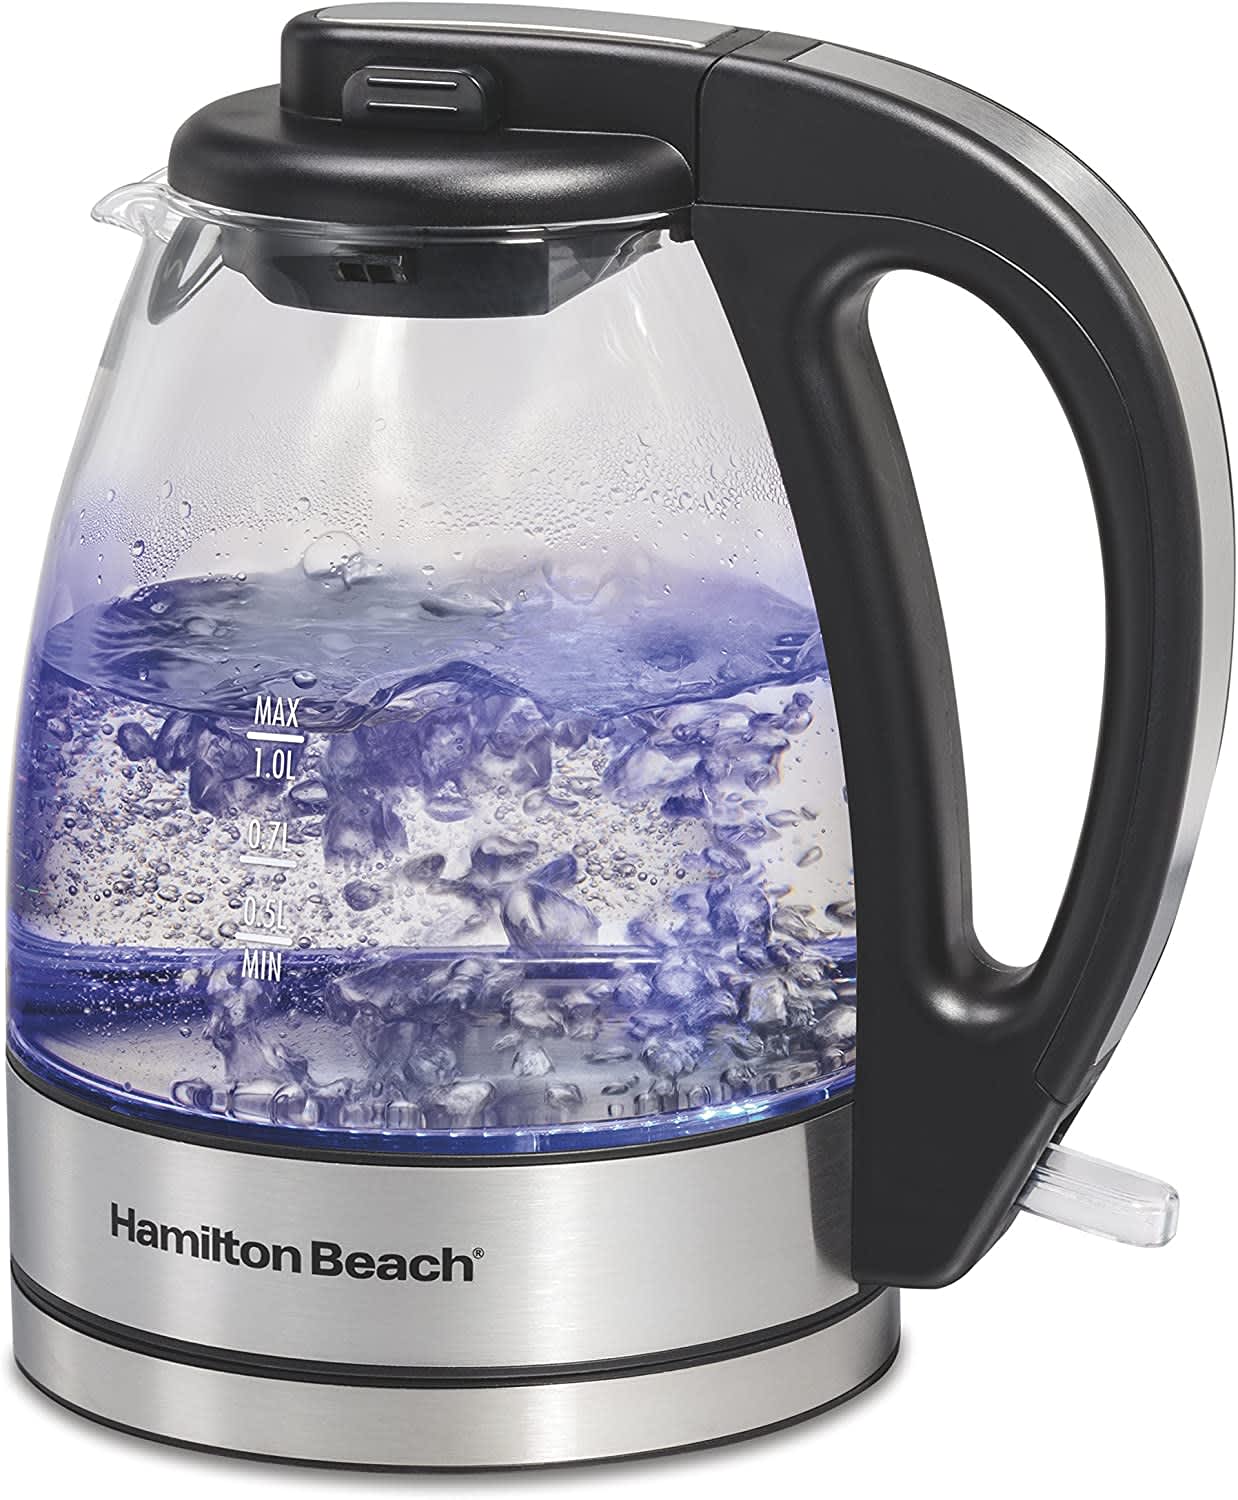 The Hamilton Beach Cool Touch Tea Kettle Review - I Need Coffee